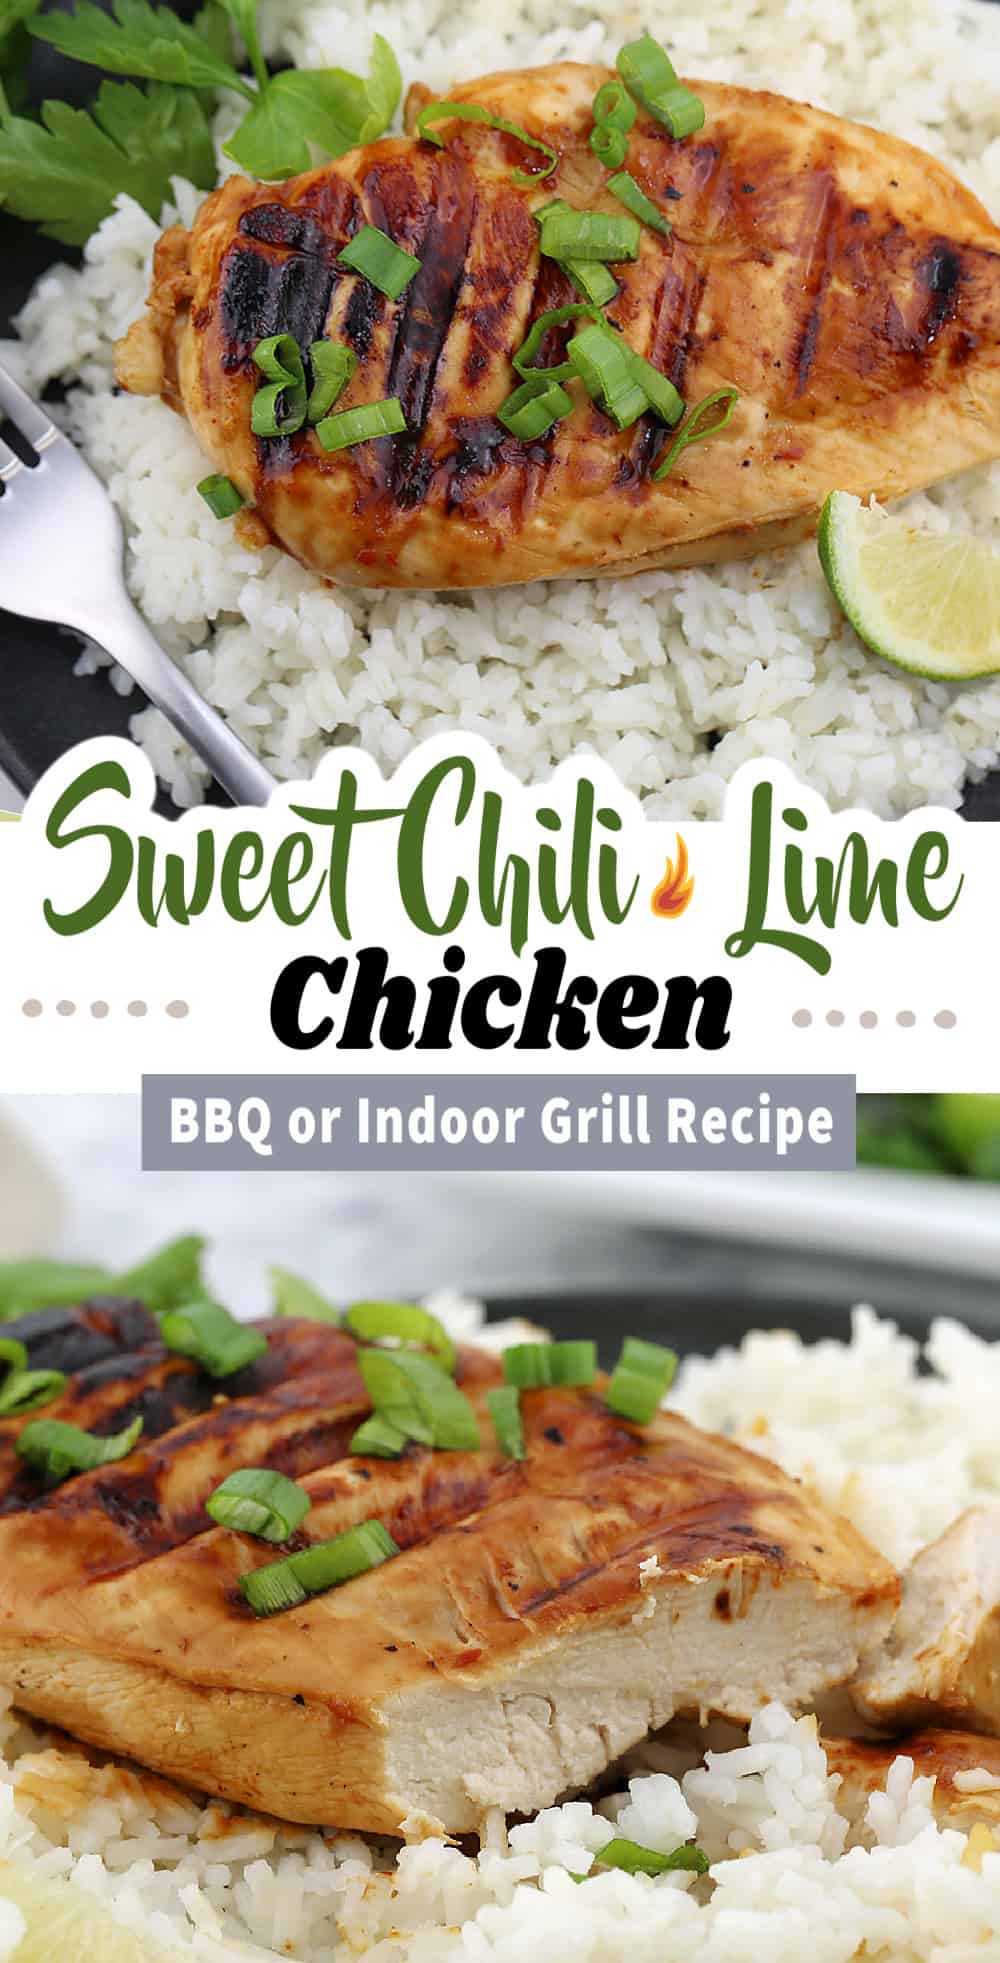 grilled chicken on a plate with text